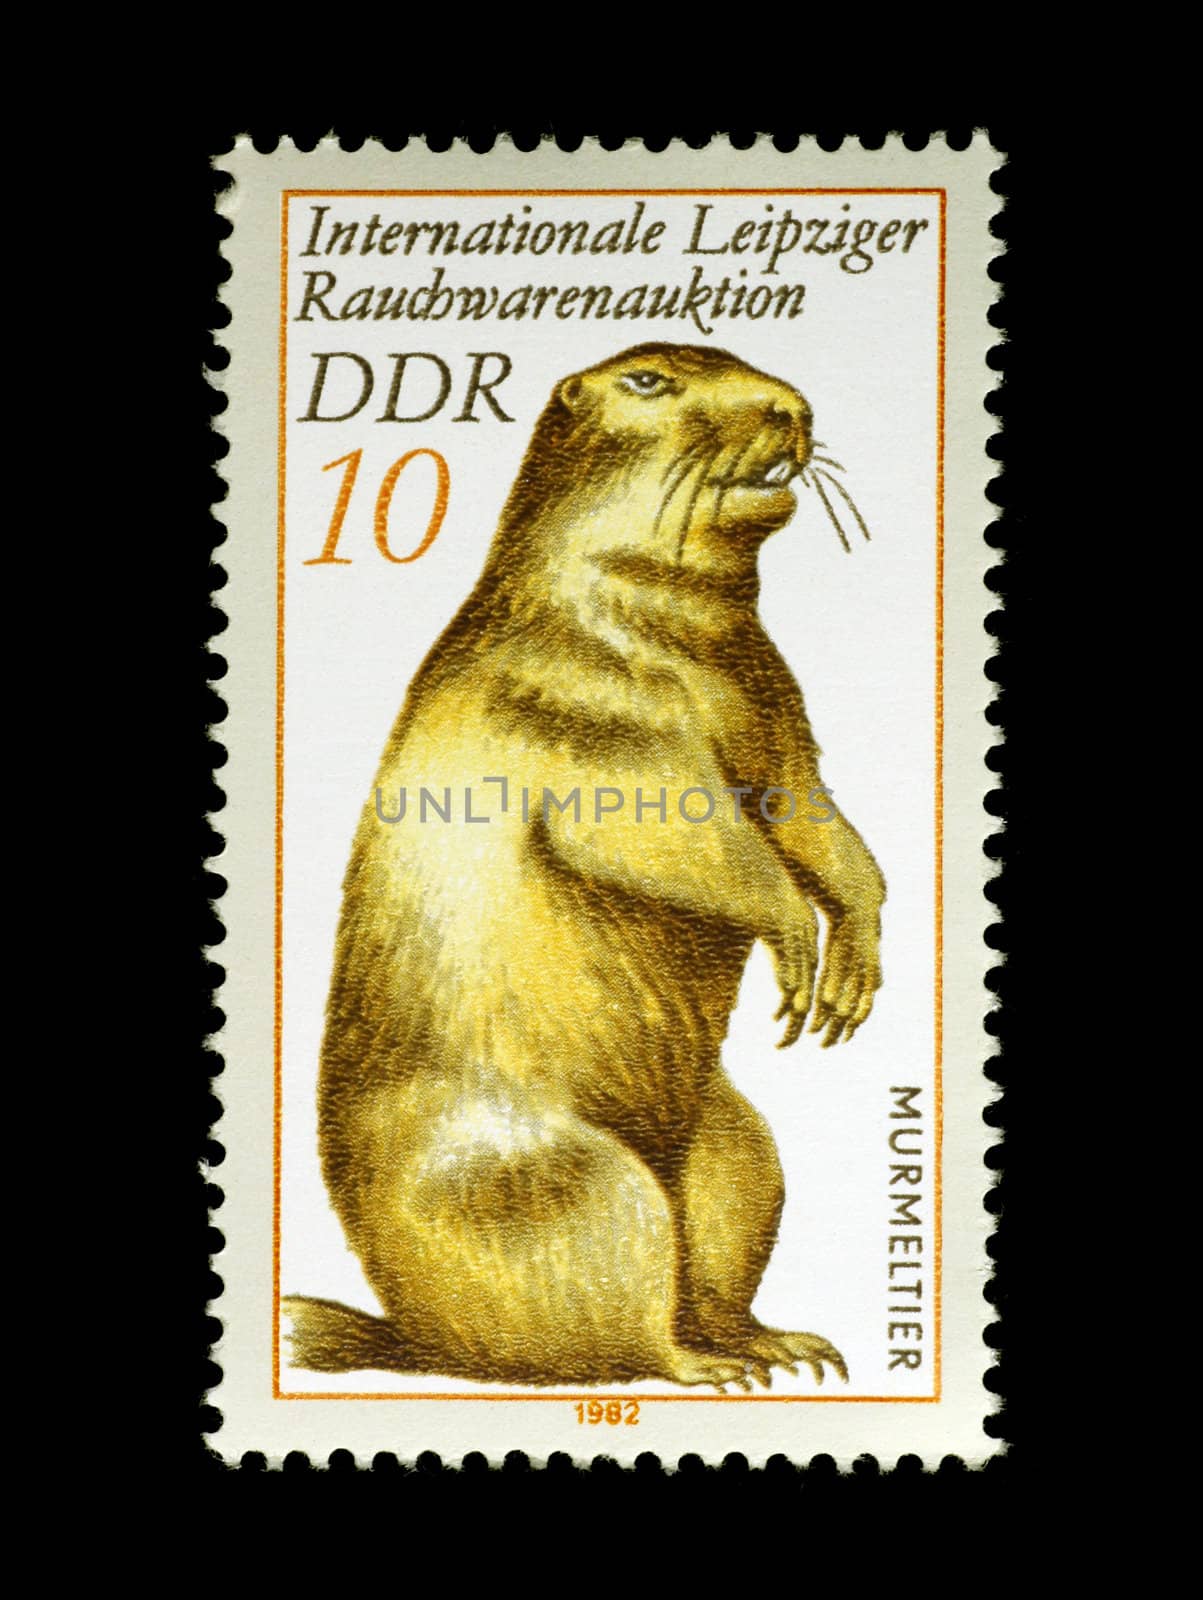 Marmot on stamp from East Germany isolated in black